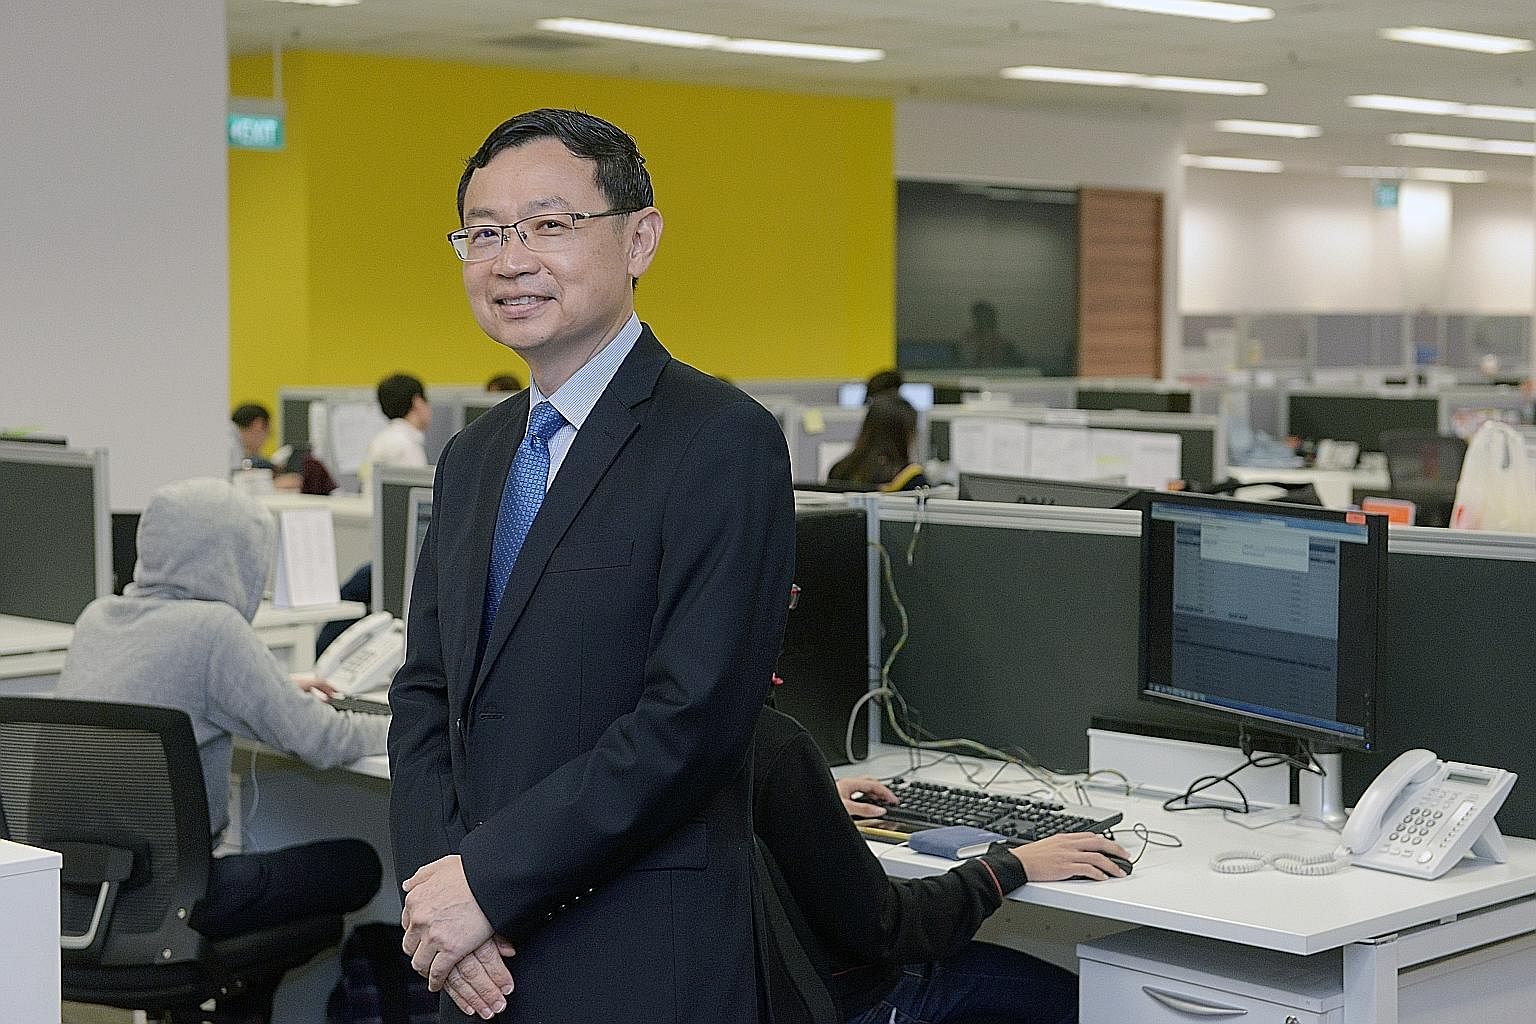 NetLink Trust CEO Tong Yew Heng is not worried that wired broadband may get displaced by wireless broadband, delivered via mobile networks. "The fibre network is future-proof because it has unlimited capacity (and) fibre carries a very wide bandwidth